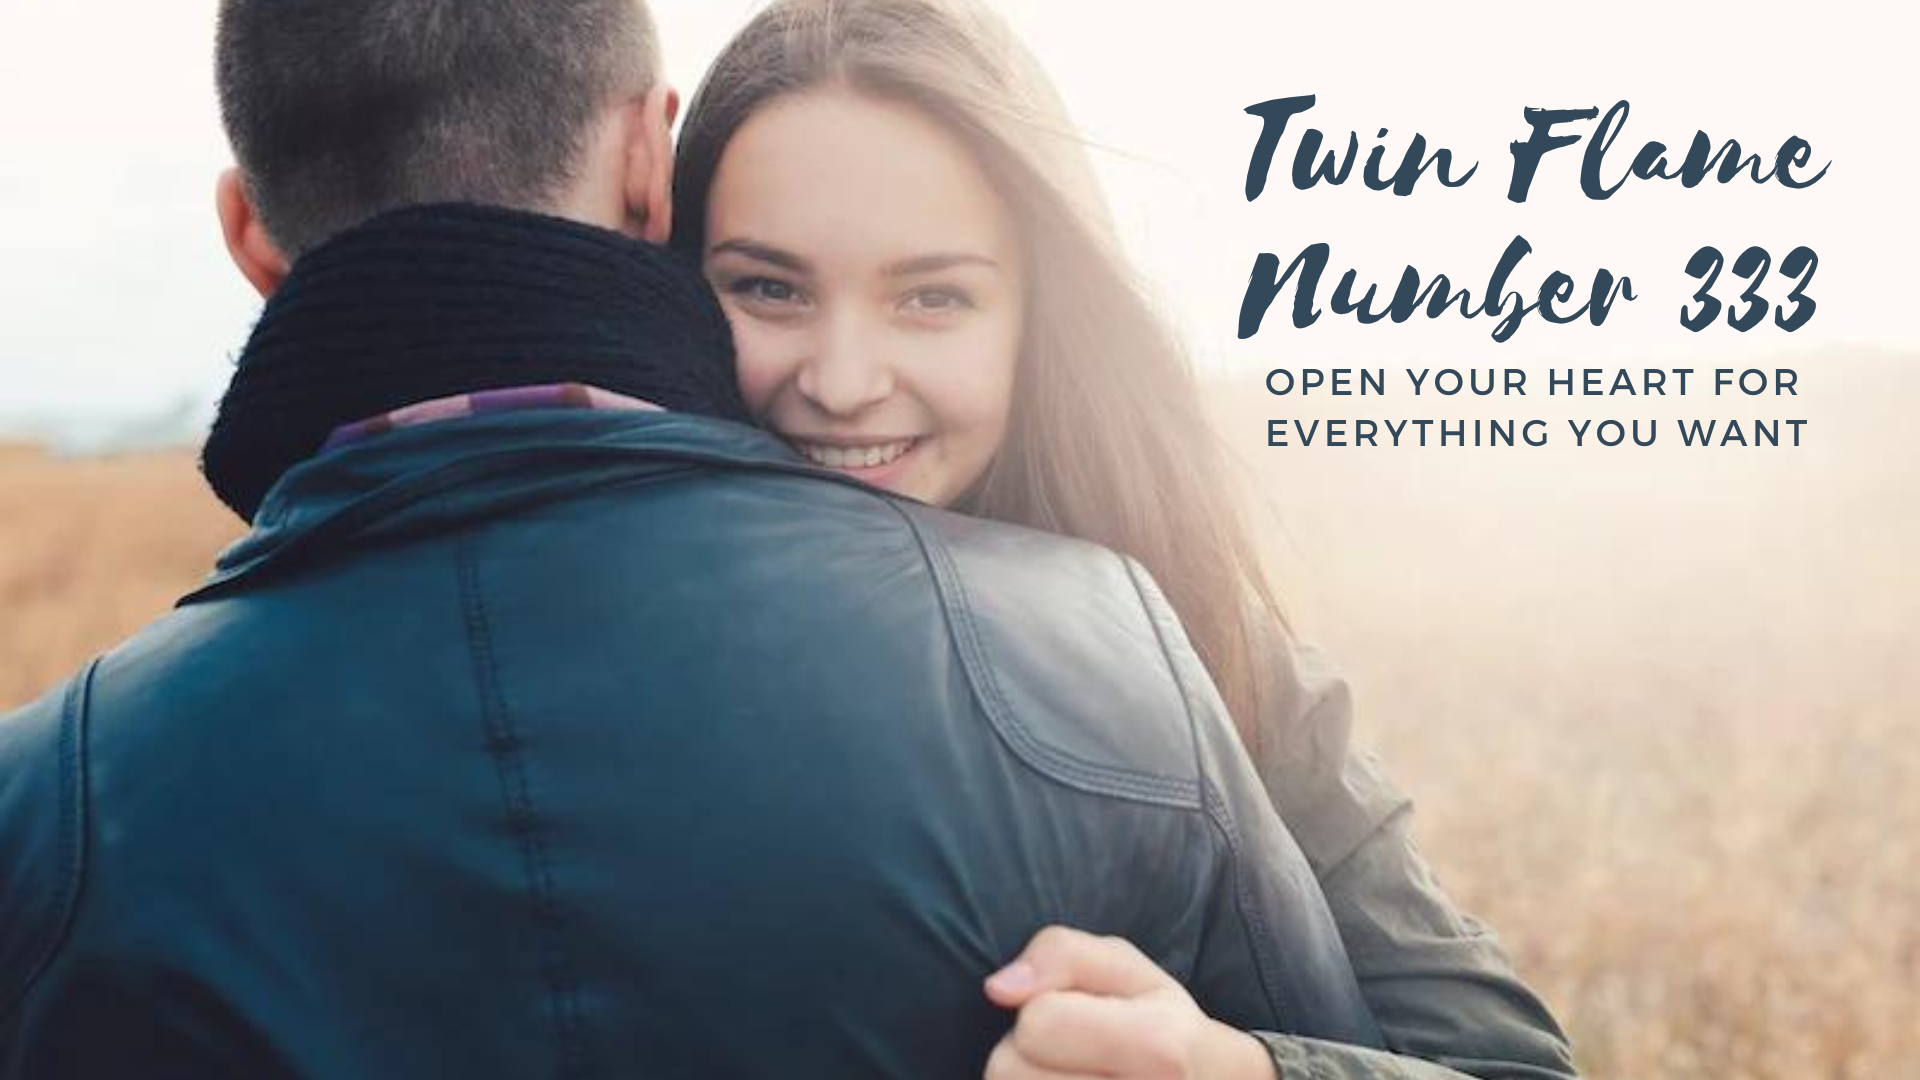 Twin Flame Number 333 - Open Your Heart For Everything You Want